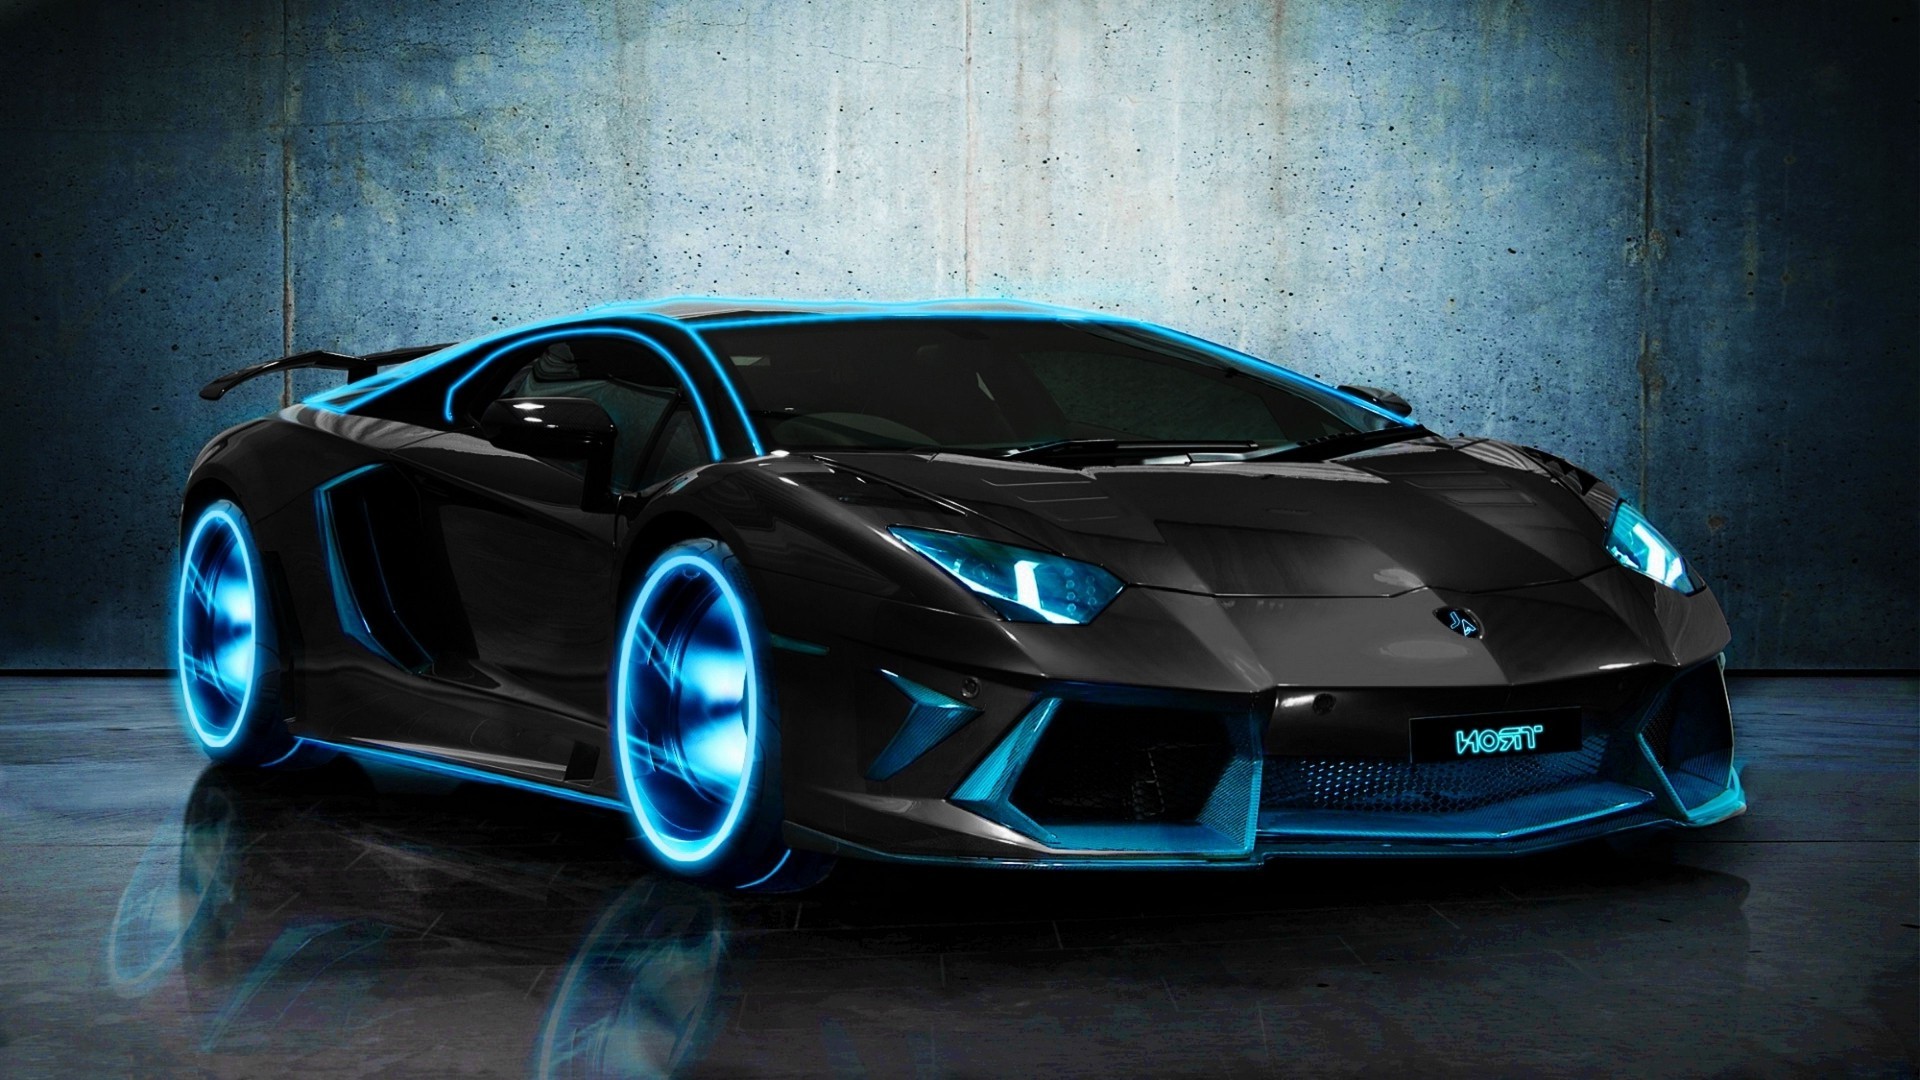  Lamborghini car wallpapers Check out these 10 amazing hd wallpapers